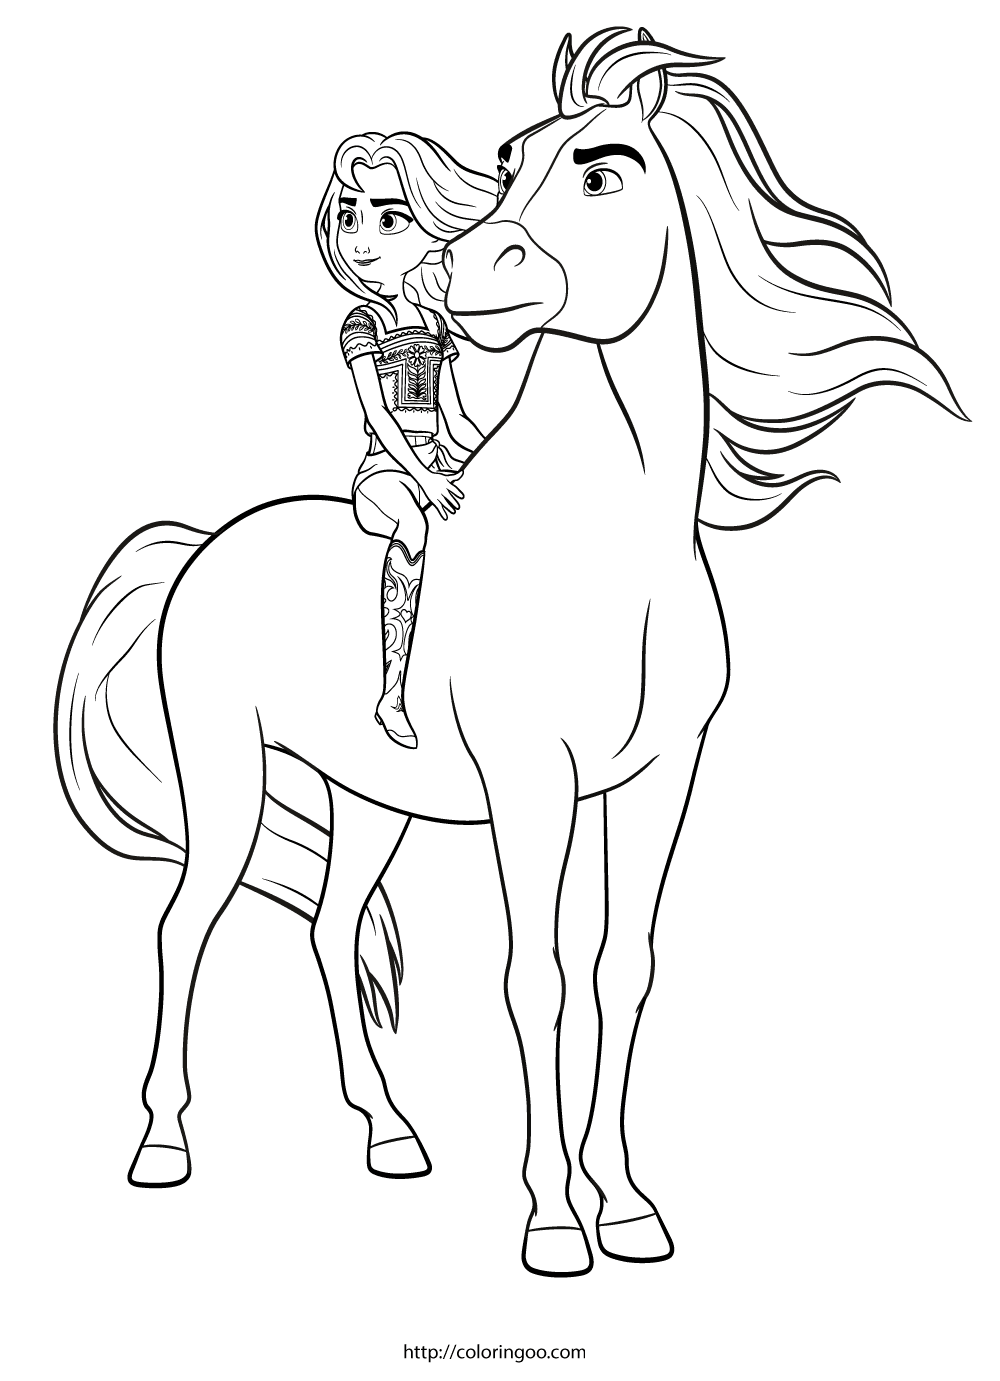 Lucky & Spirit Coloring Page